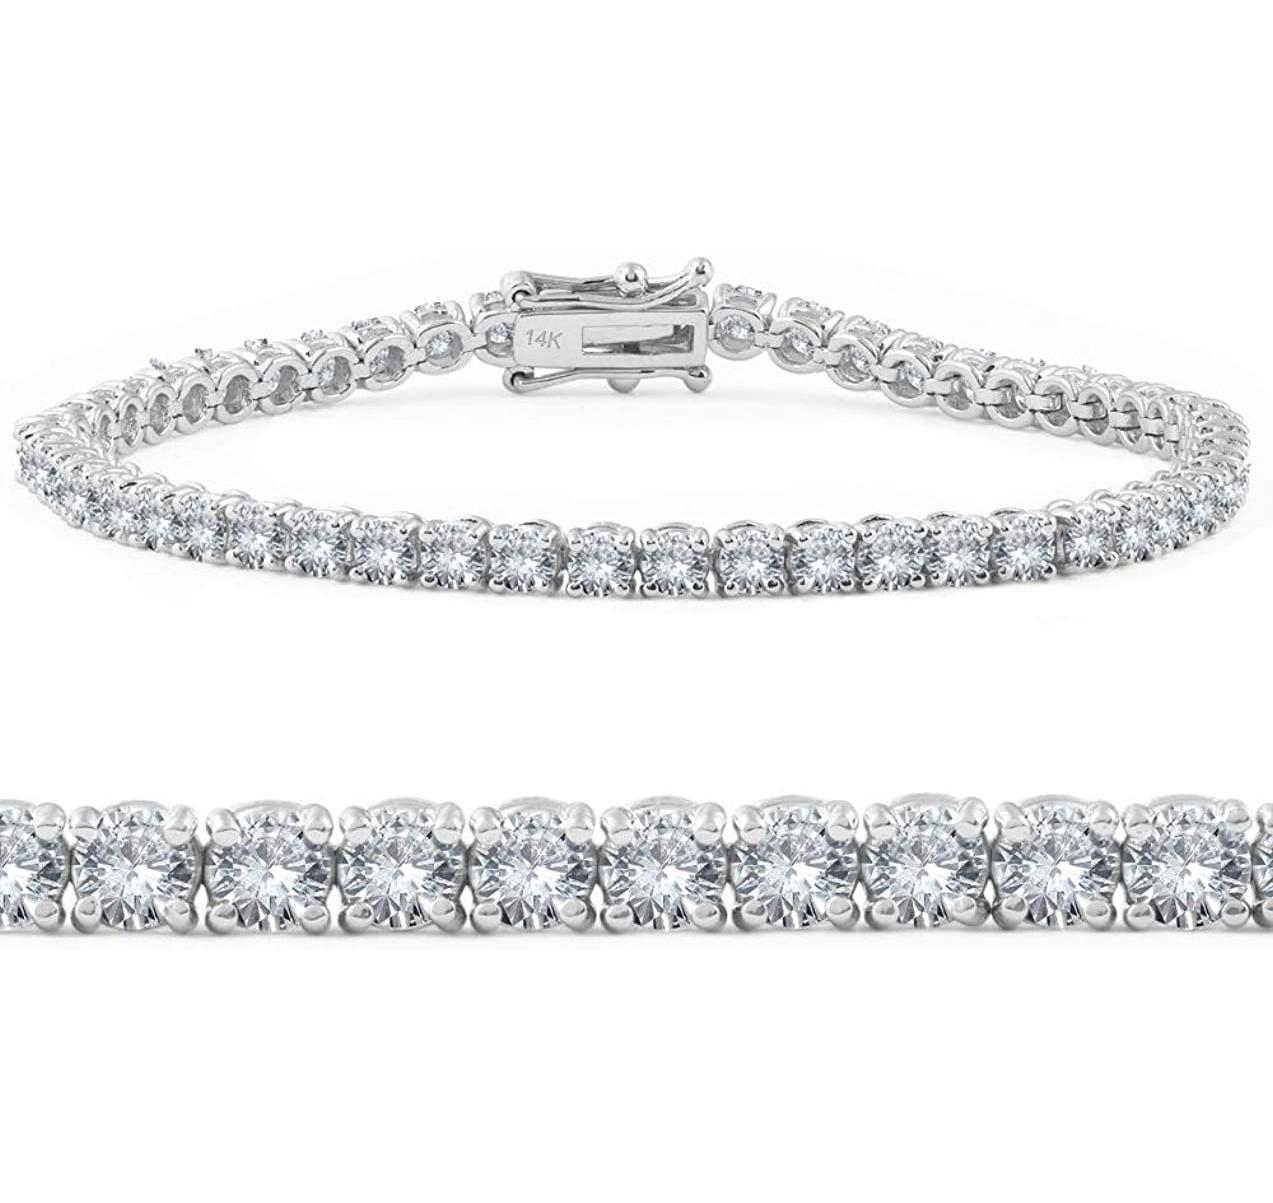 14K White Gold with 2.75TCW Diamond Tennis Bracelet

Add a touch of elegance and luxury to your jewelry collection with this stunning 14k white gold bracelet. This bracelet features 92 round brilliant cut diamonds of total carat weight of 2.75 TCW G